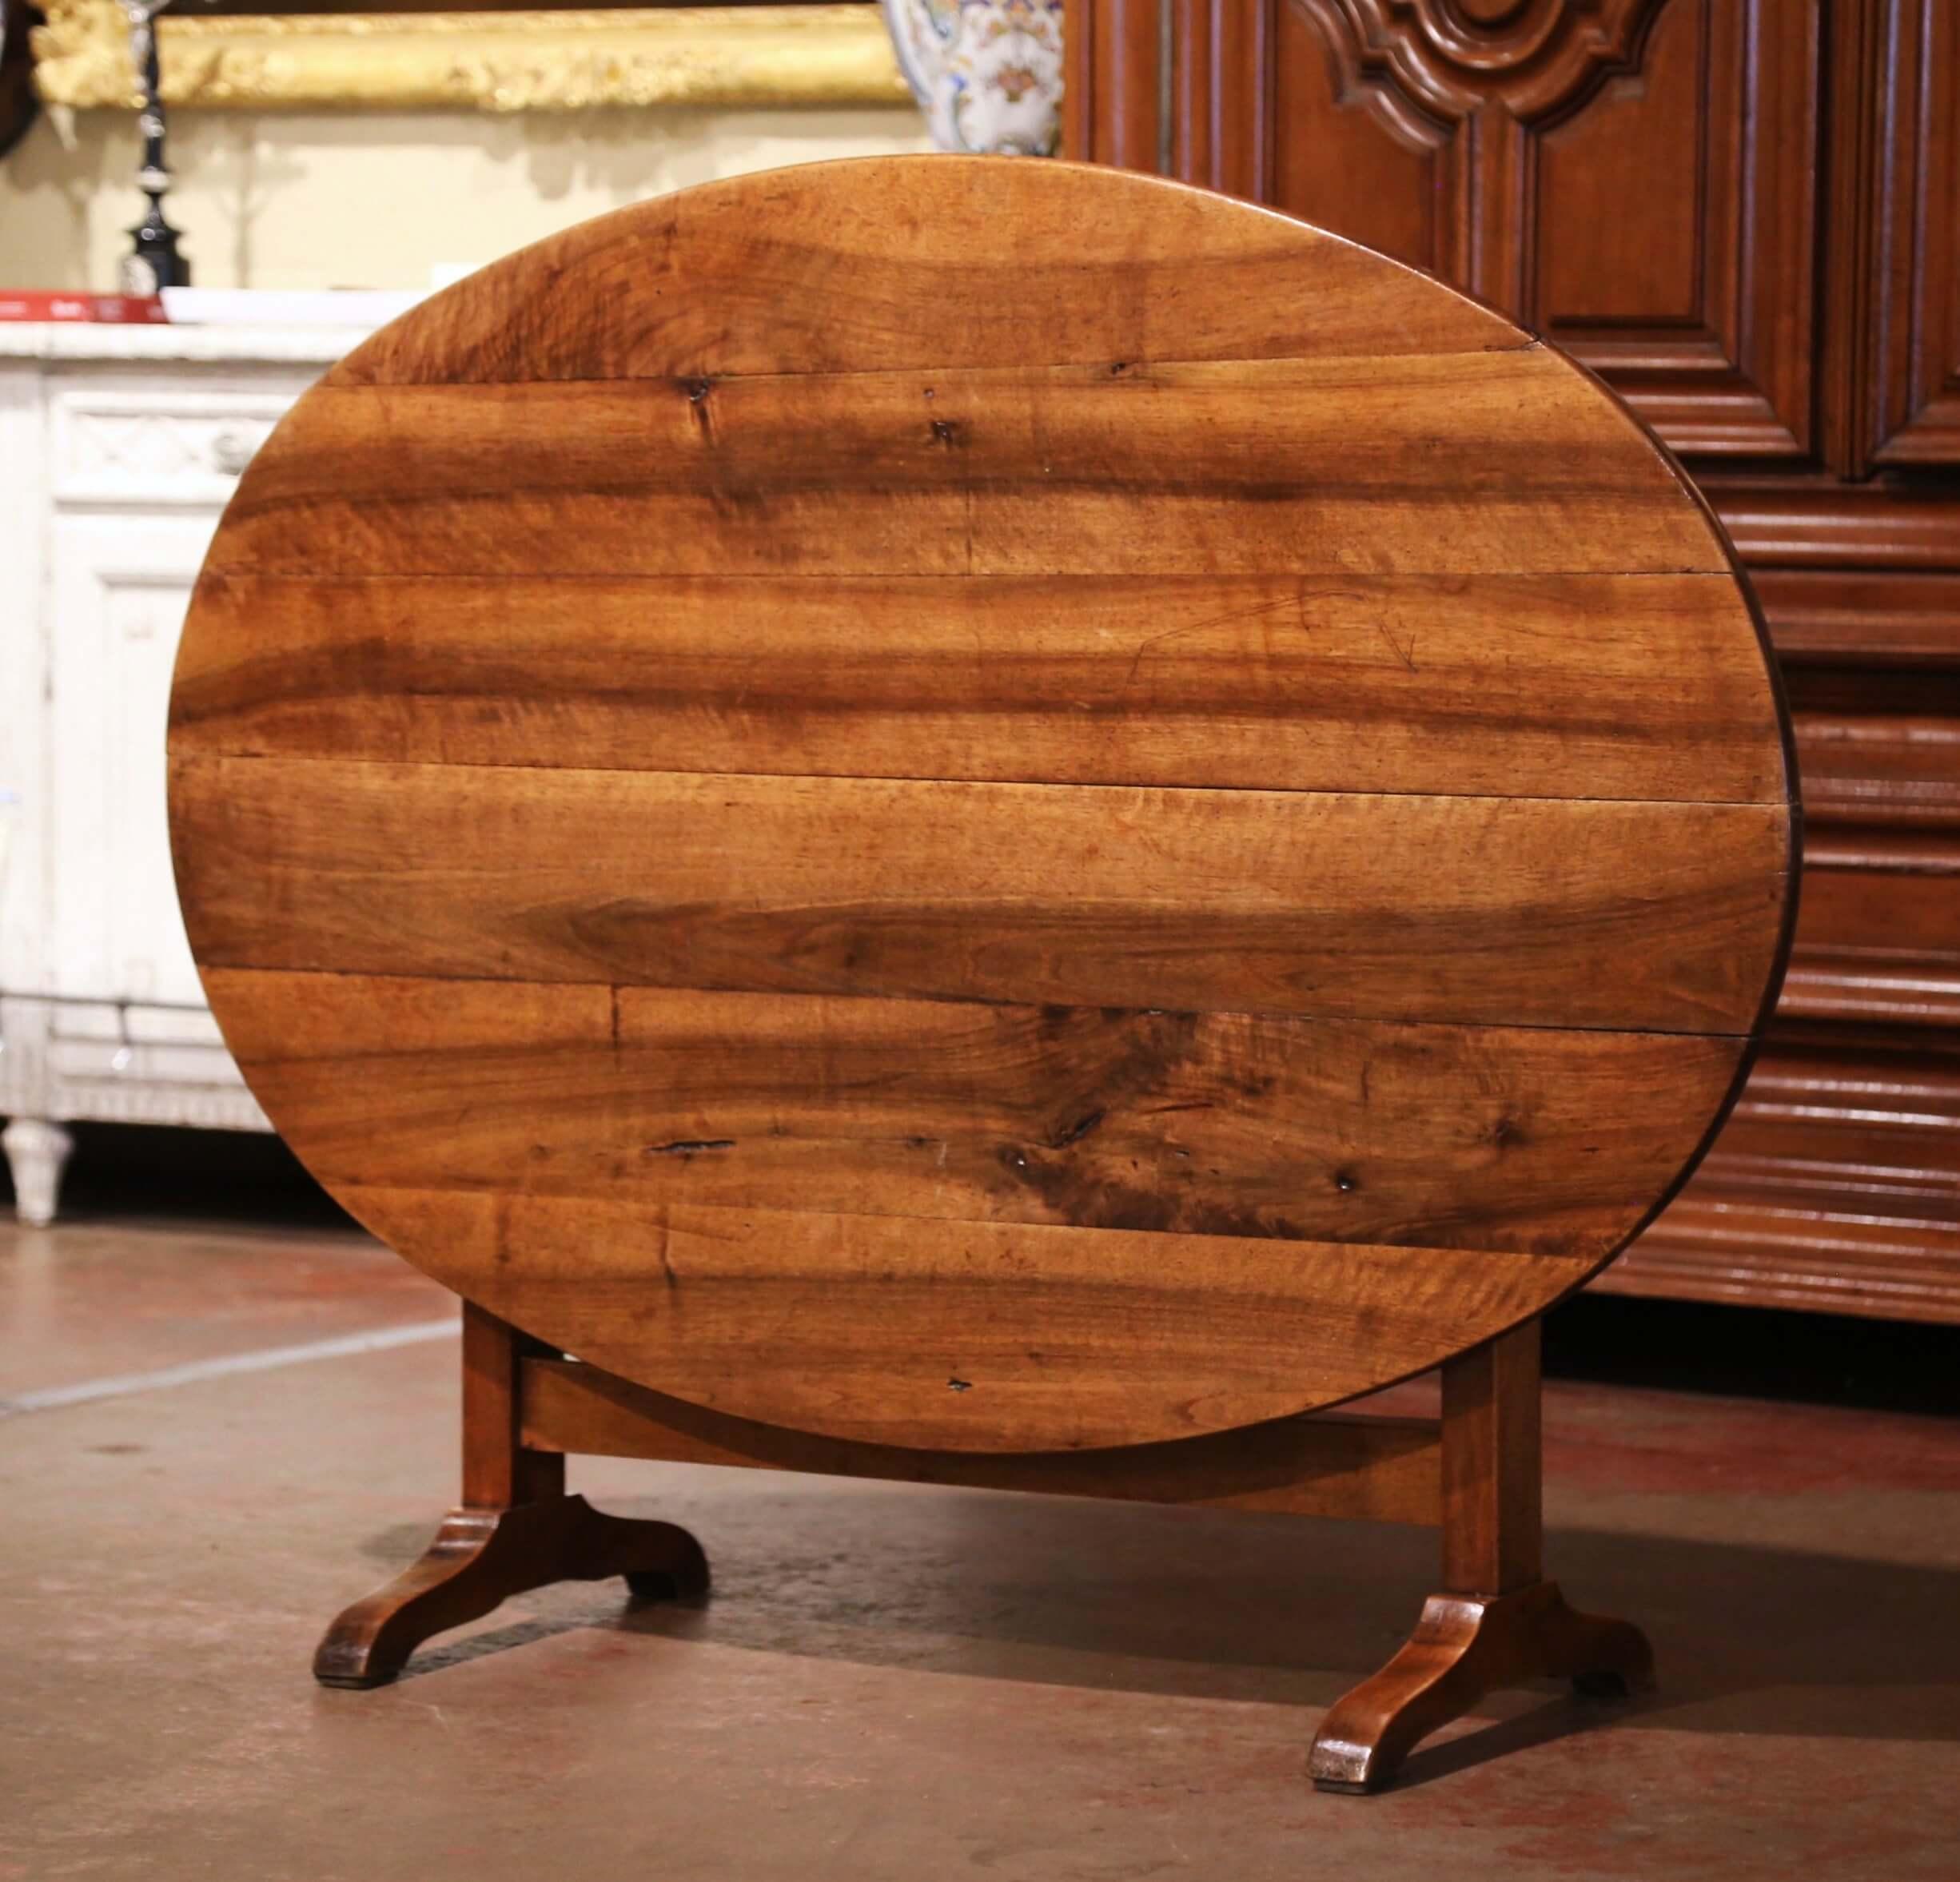 Add a touch of the French lifestyle to your home with this elegant walnut 